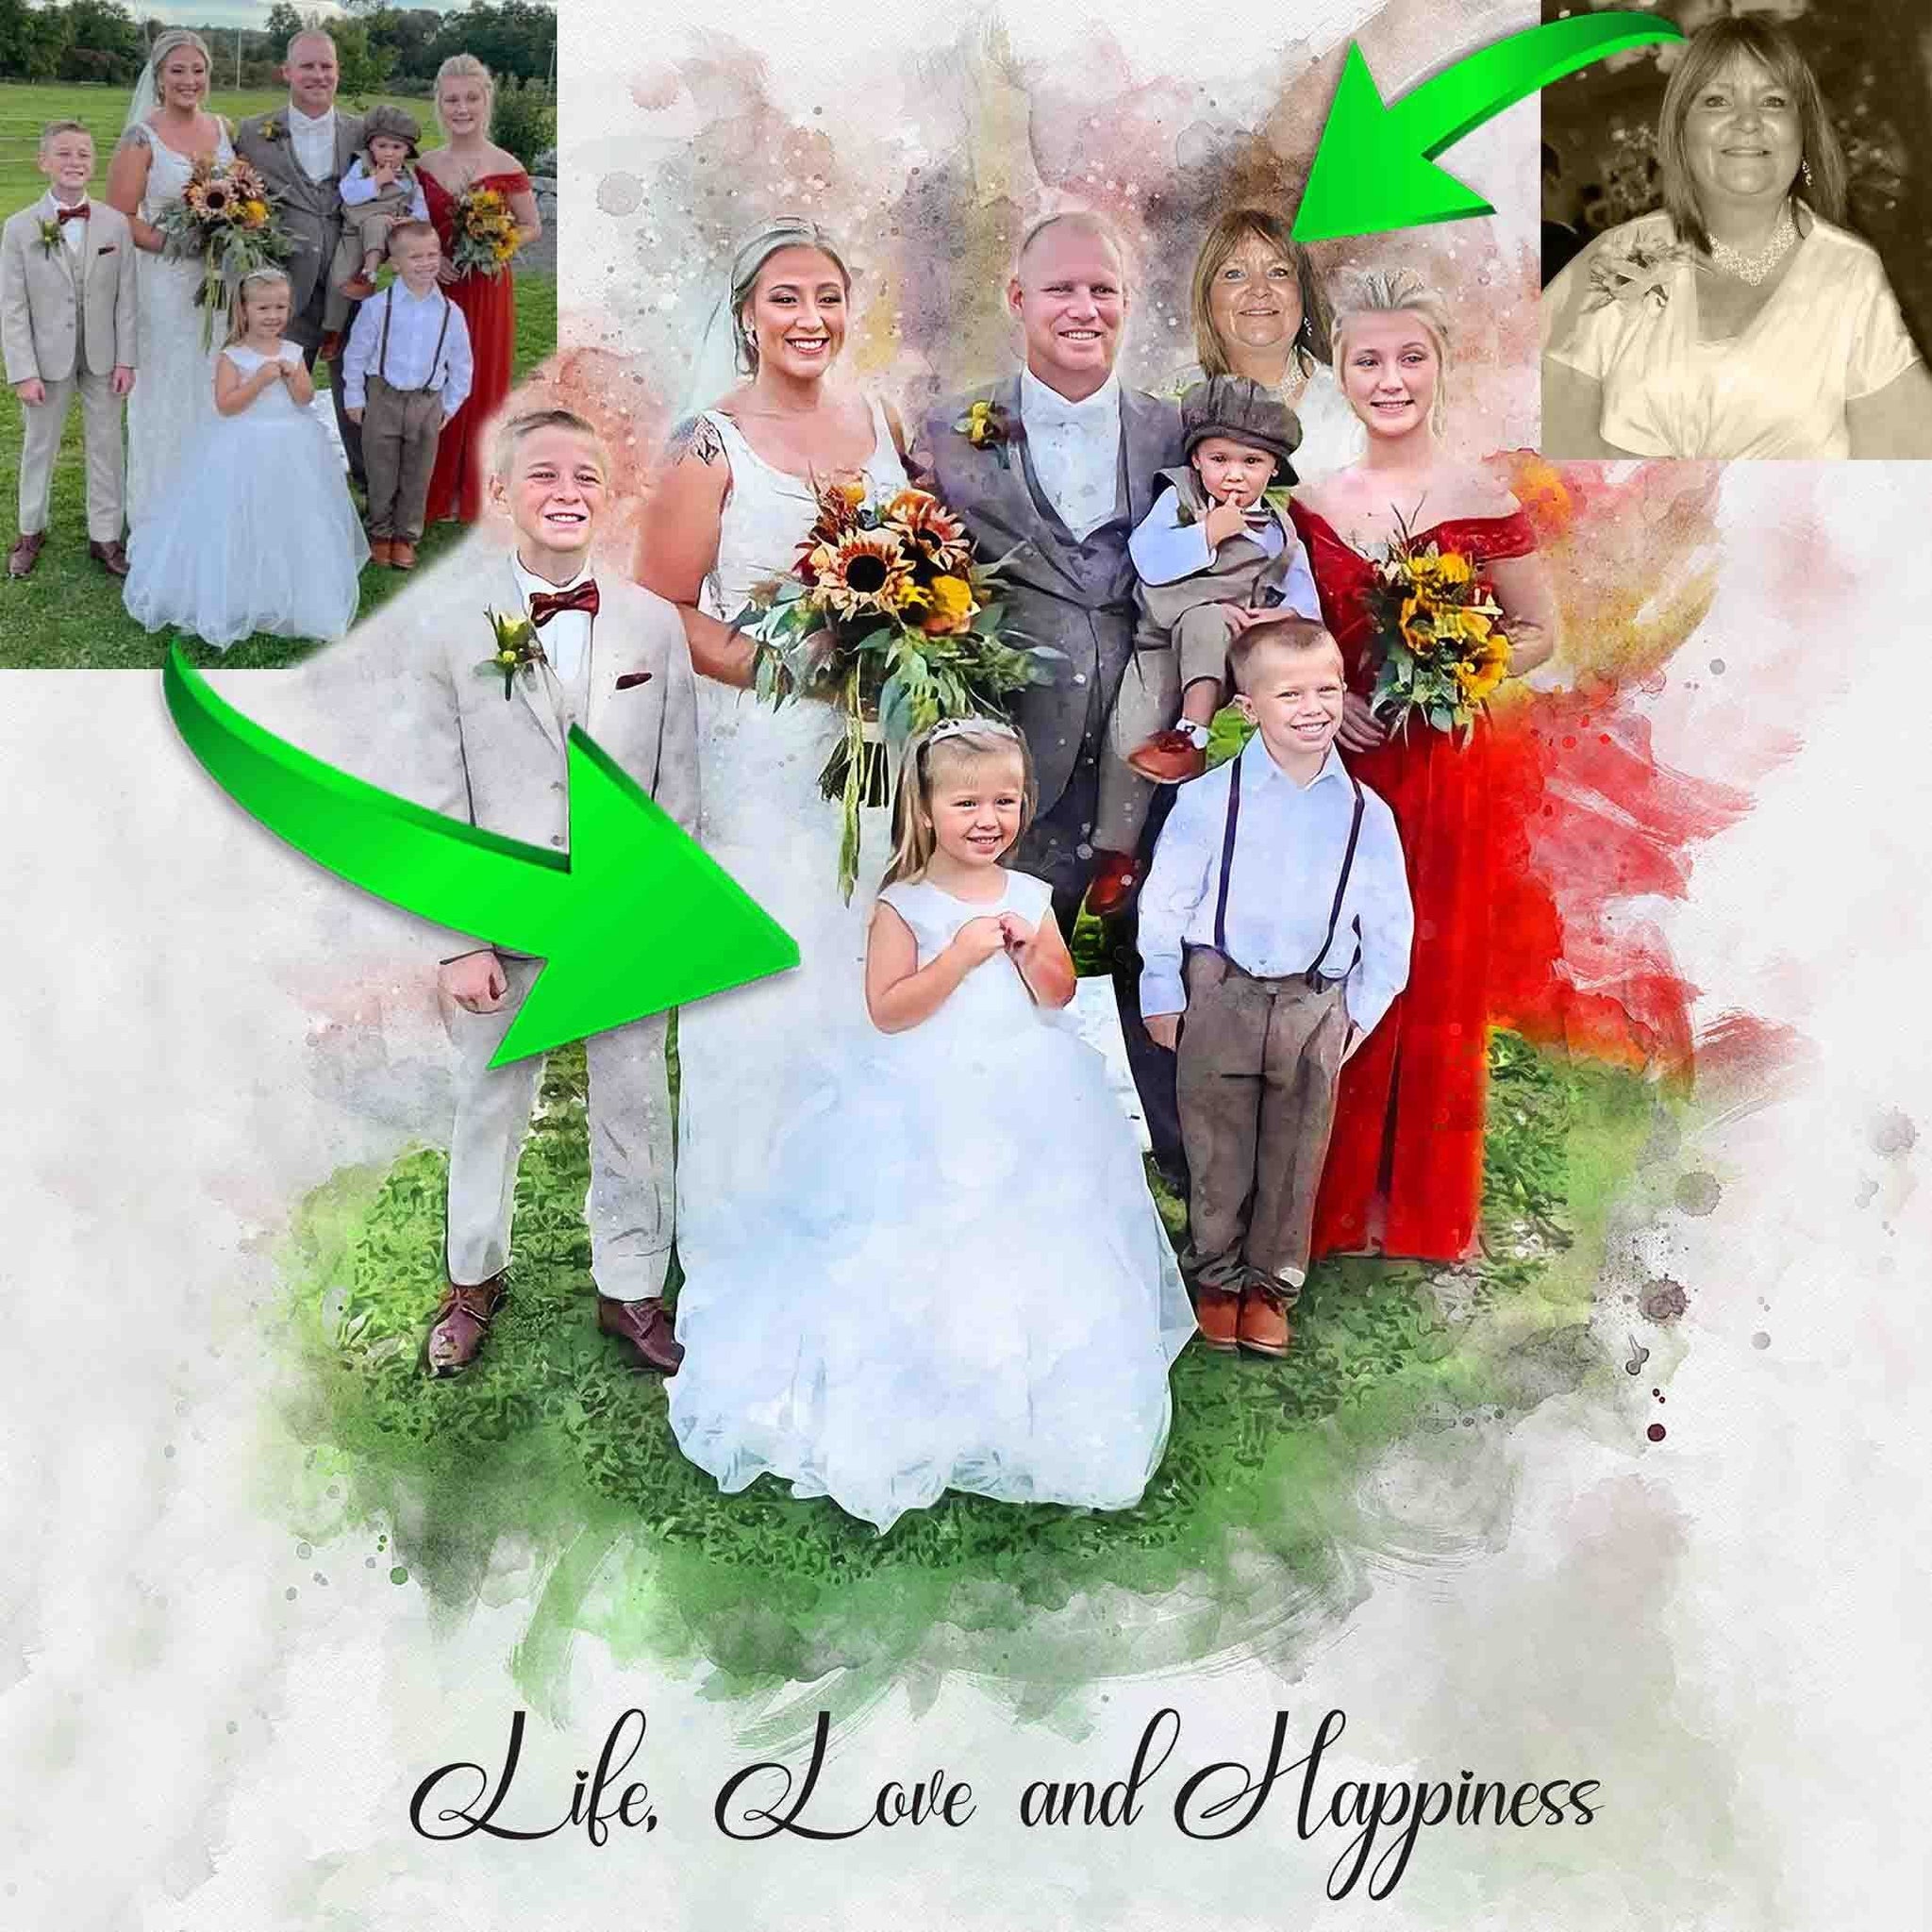 Adding Deceased Person to Photo, Custom Portrait on Canvas - FromPicToArt